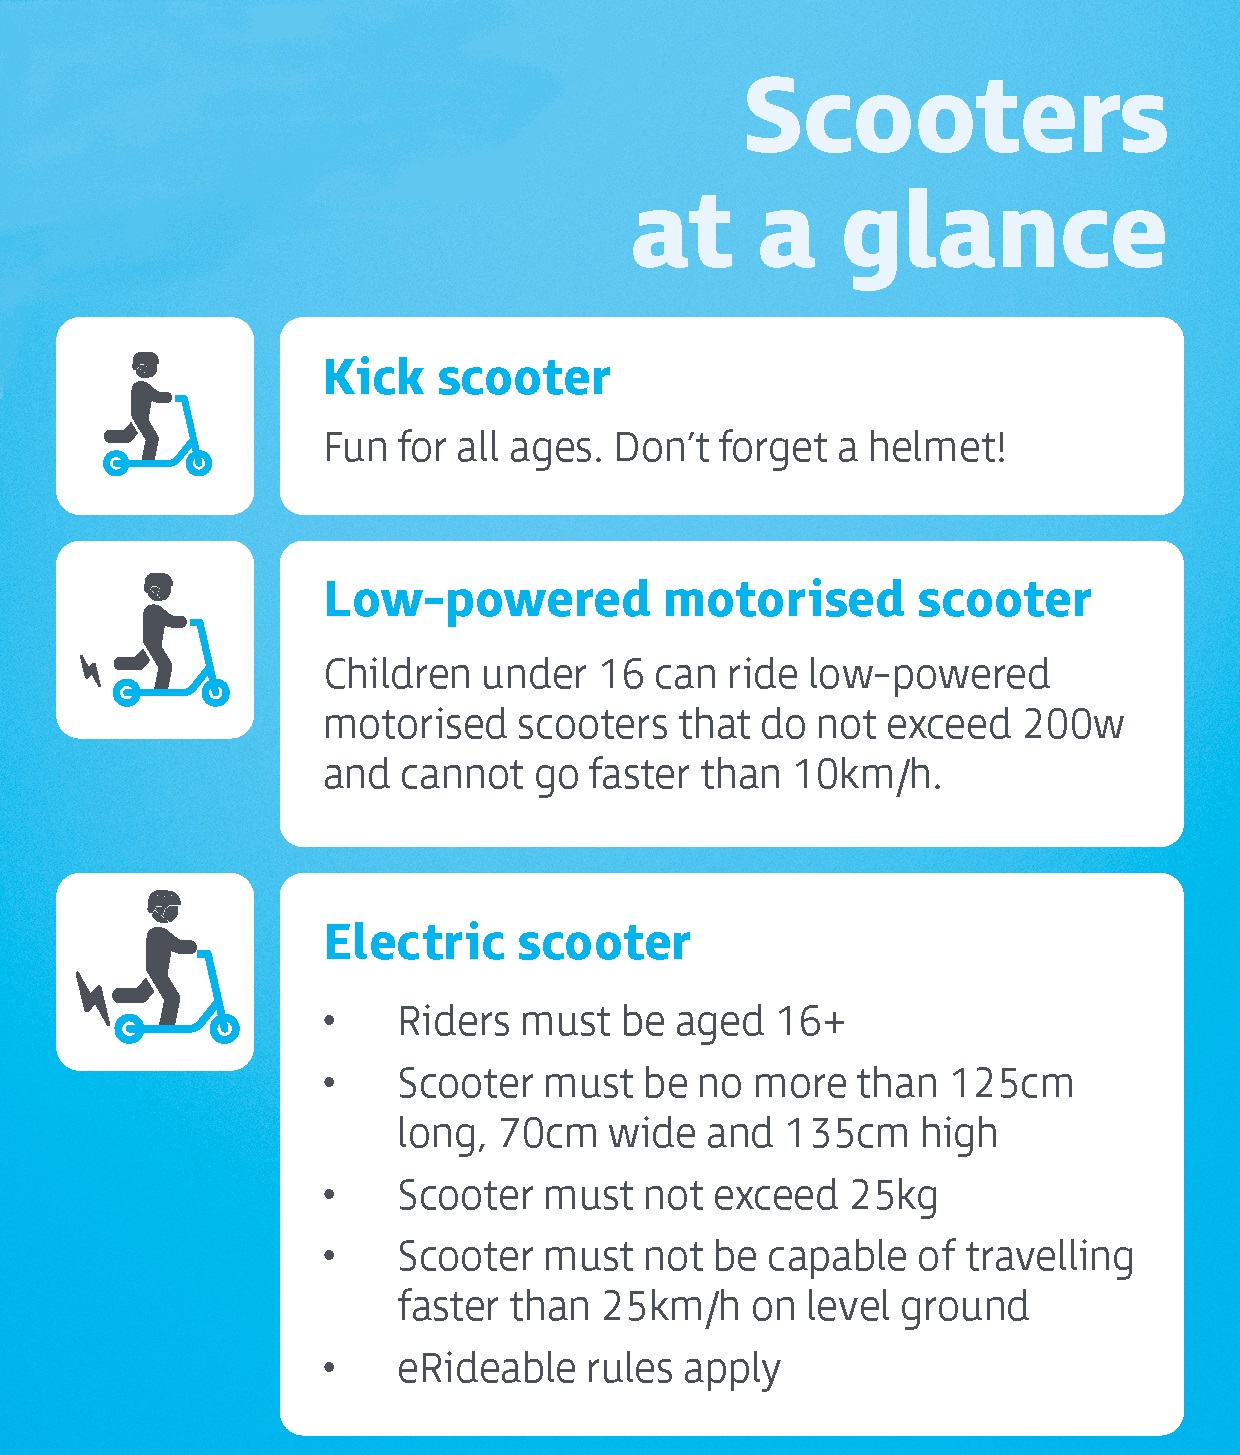 types of scooters include a kick scooter, low powered motorised scooter, and electric scooters